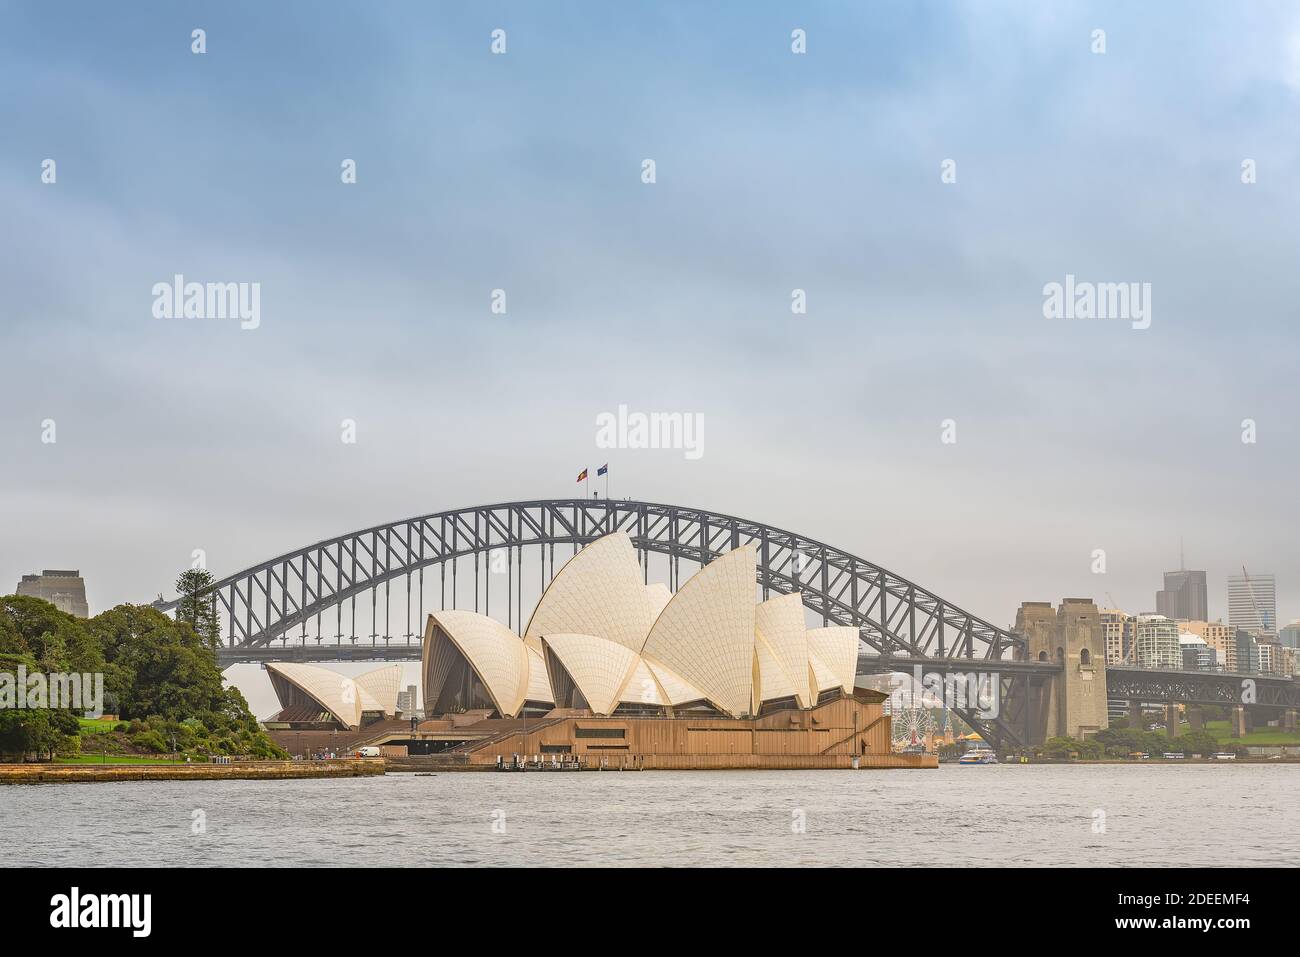 Sydney, New South Wales, Australia ; A view of the Sydney Harbor Bridge and Opera House from the Botanical Gardens. Stock Photo